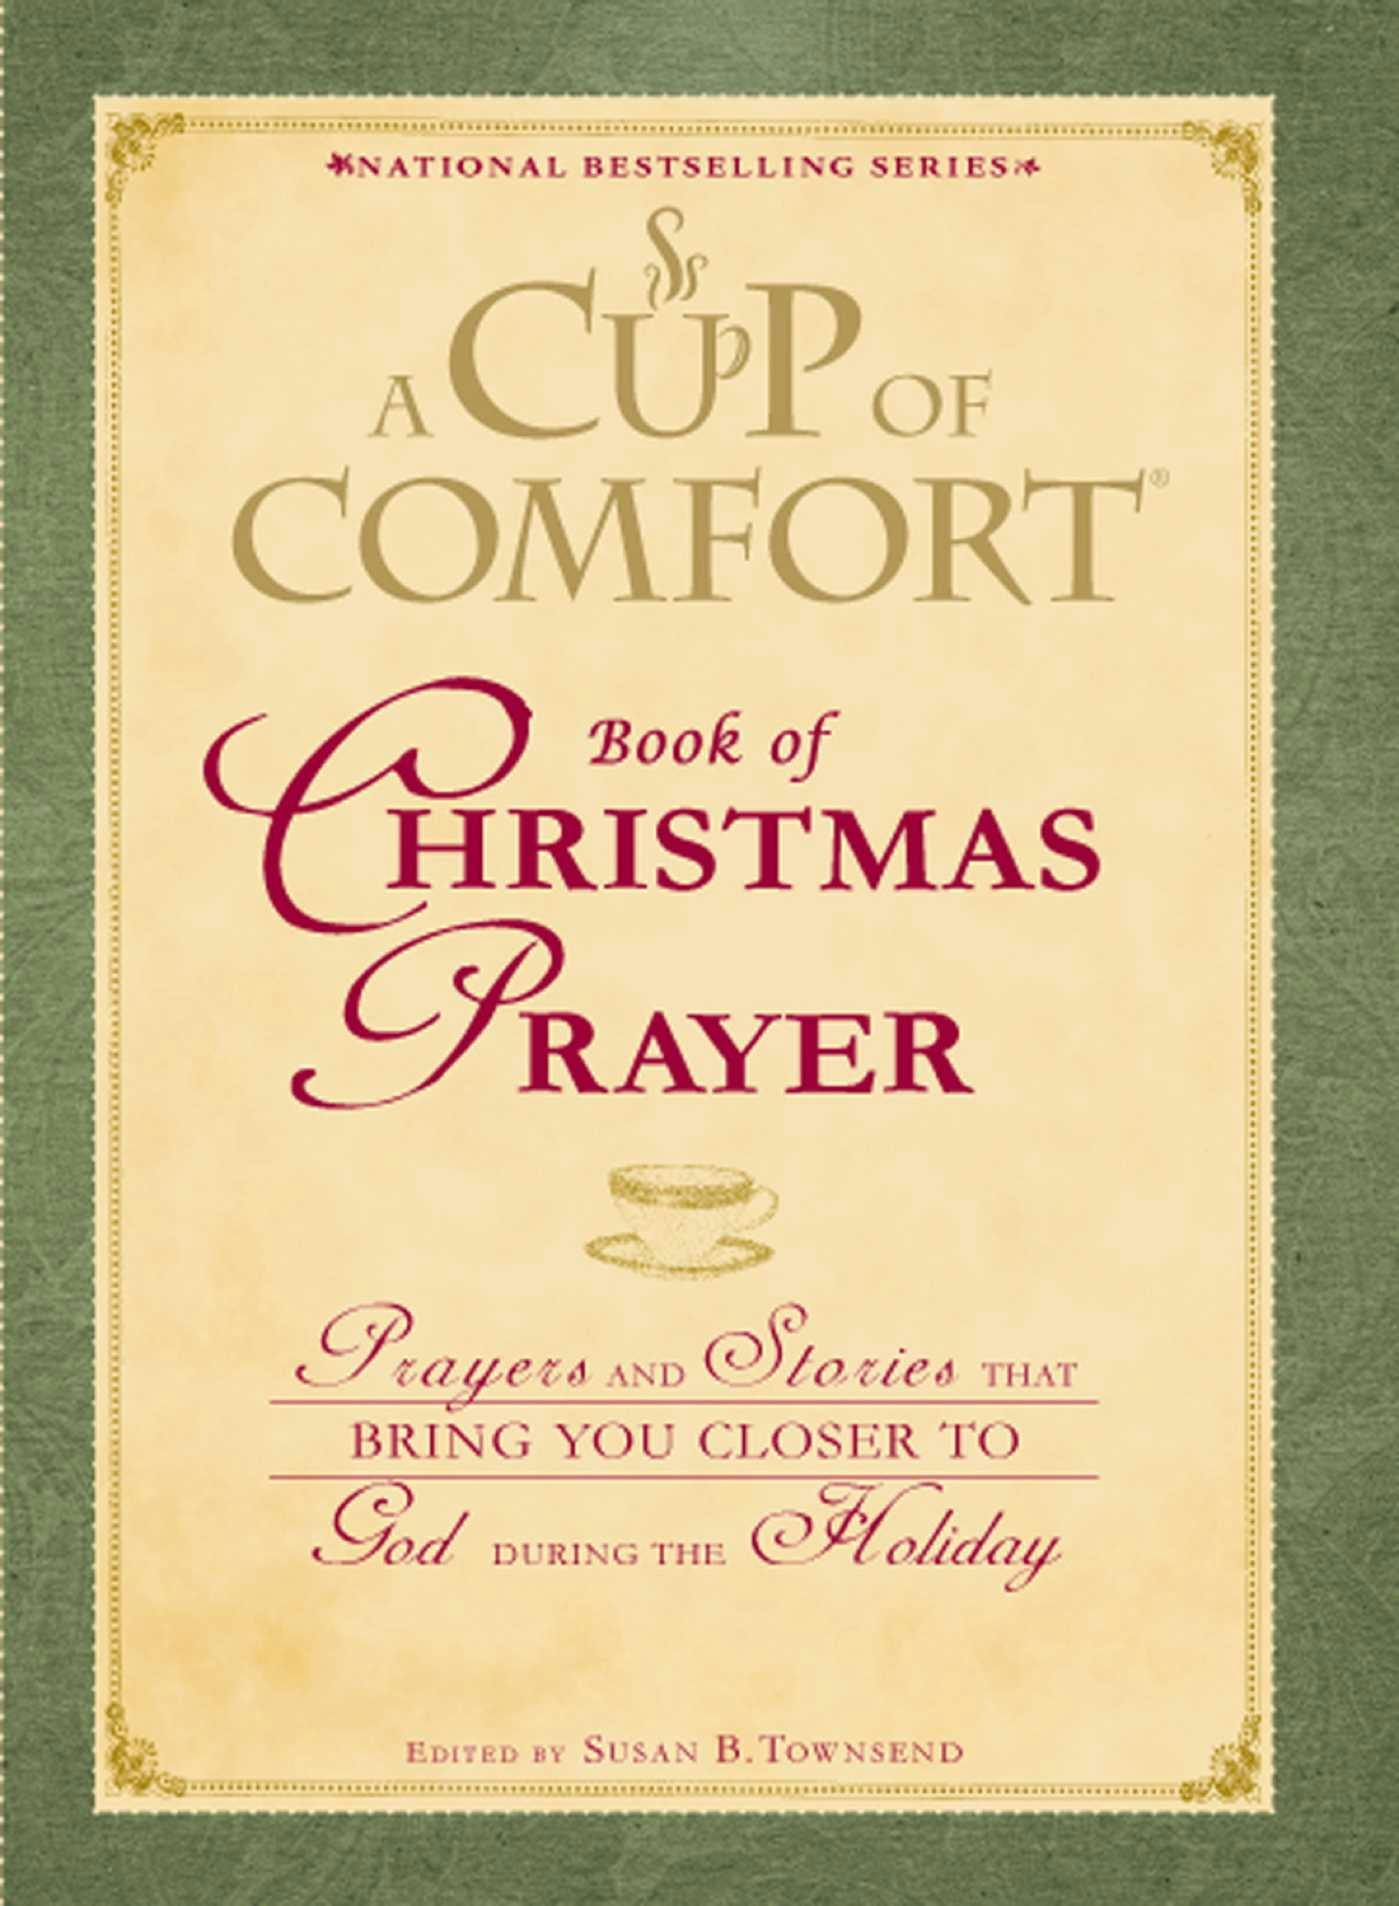 A Cup of Comfort Book of Christmas Prayer: Prayers and Stories that Bring You Closer to God During the Holiday - undefined